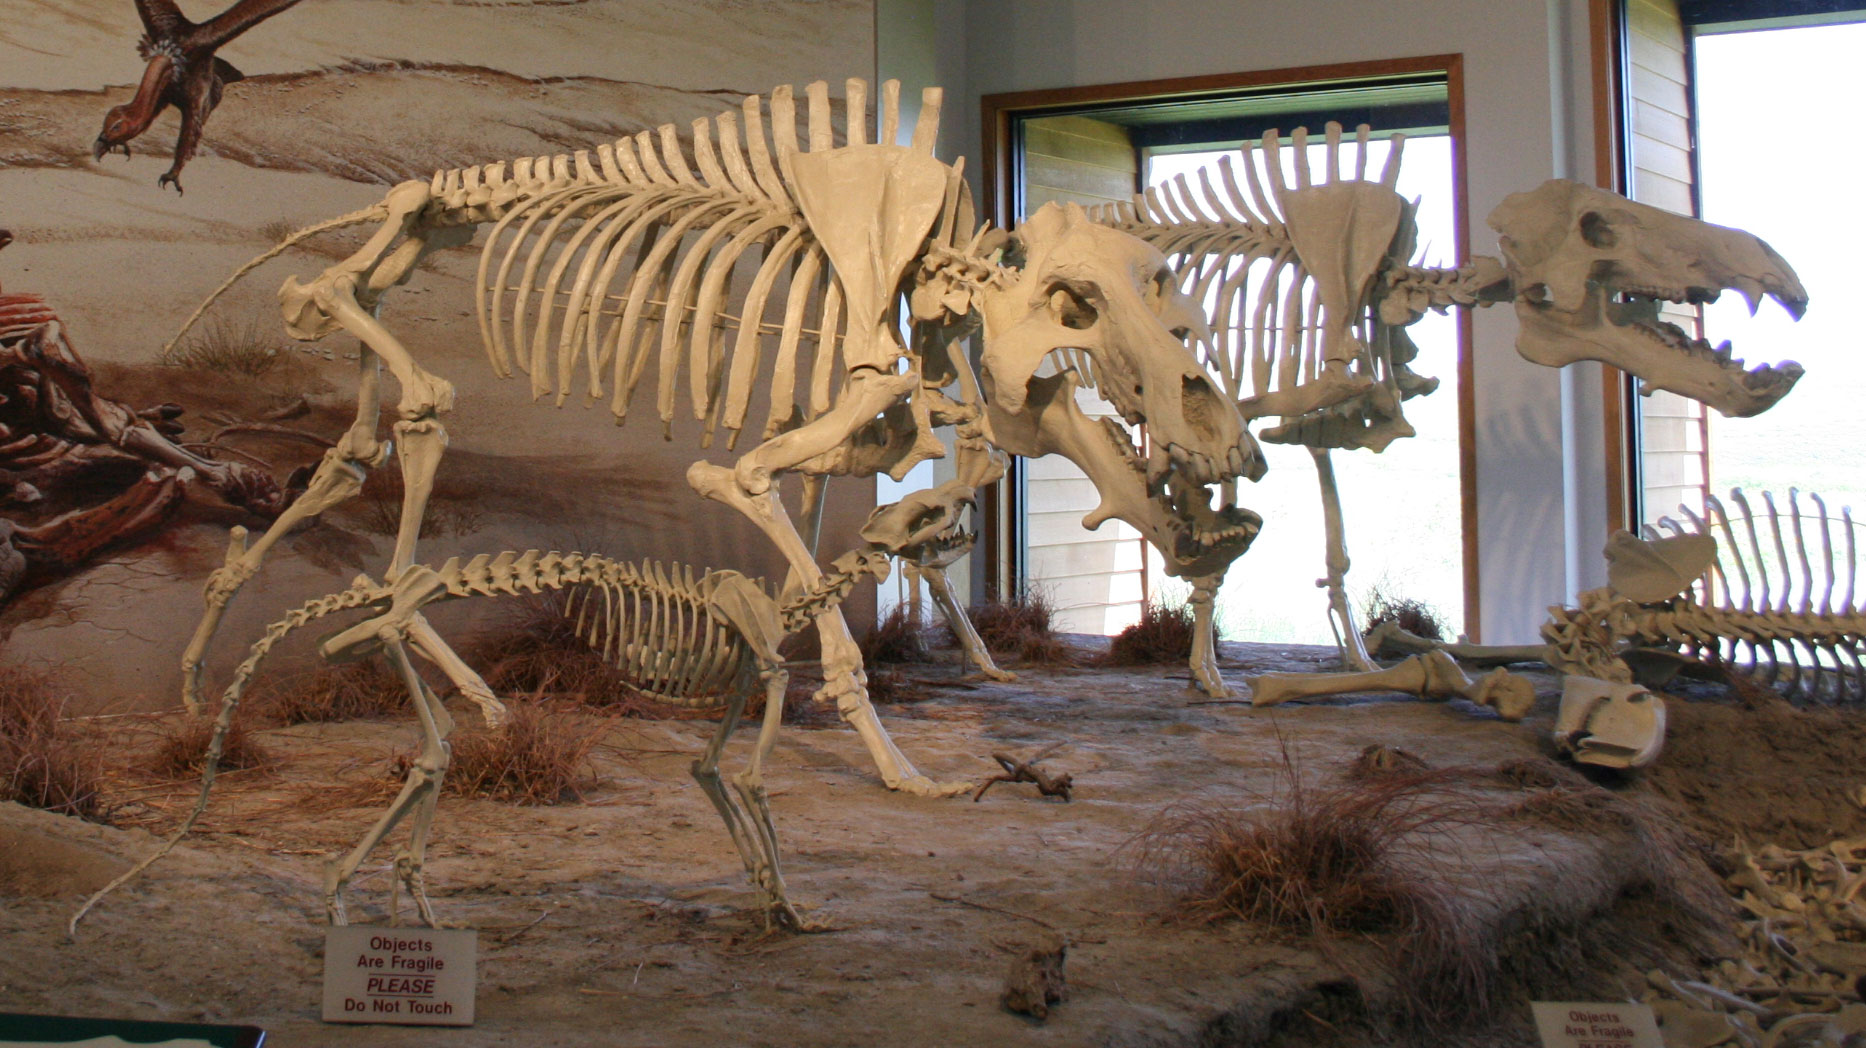 Photograph of a diorama at Agate Fossil Beds National Monument, Nebraska. The diorama shows reconstructions of four skeletons: two entelodonts ("hell pigs") standing side-by side, with a beardog also standing nearby. Laying on the ground in the background is a skeleton of a large Moropus. A painting in the background shows a vulture flying toward a kill.